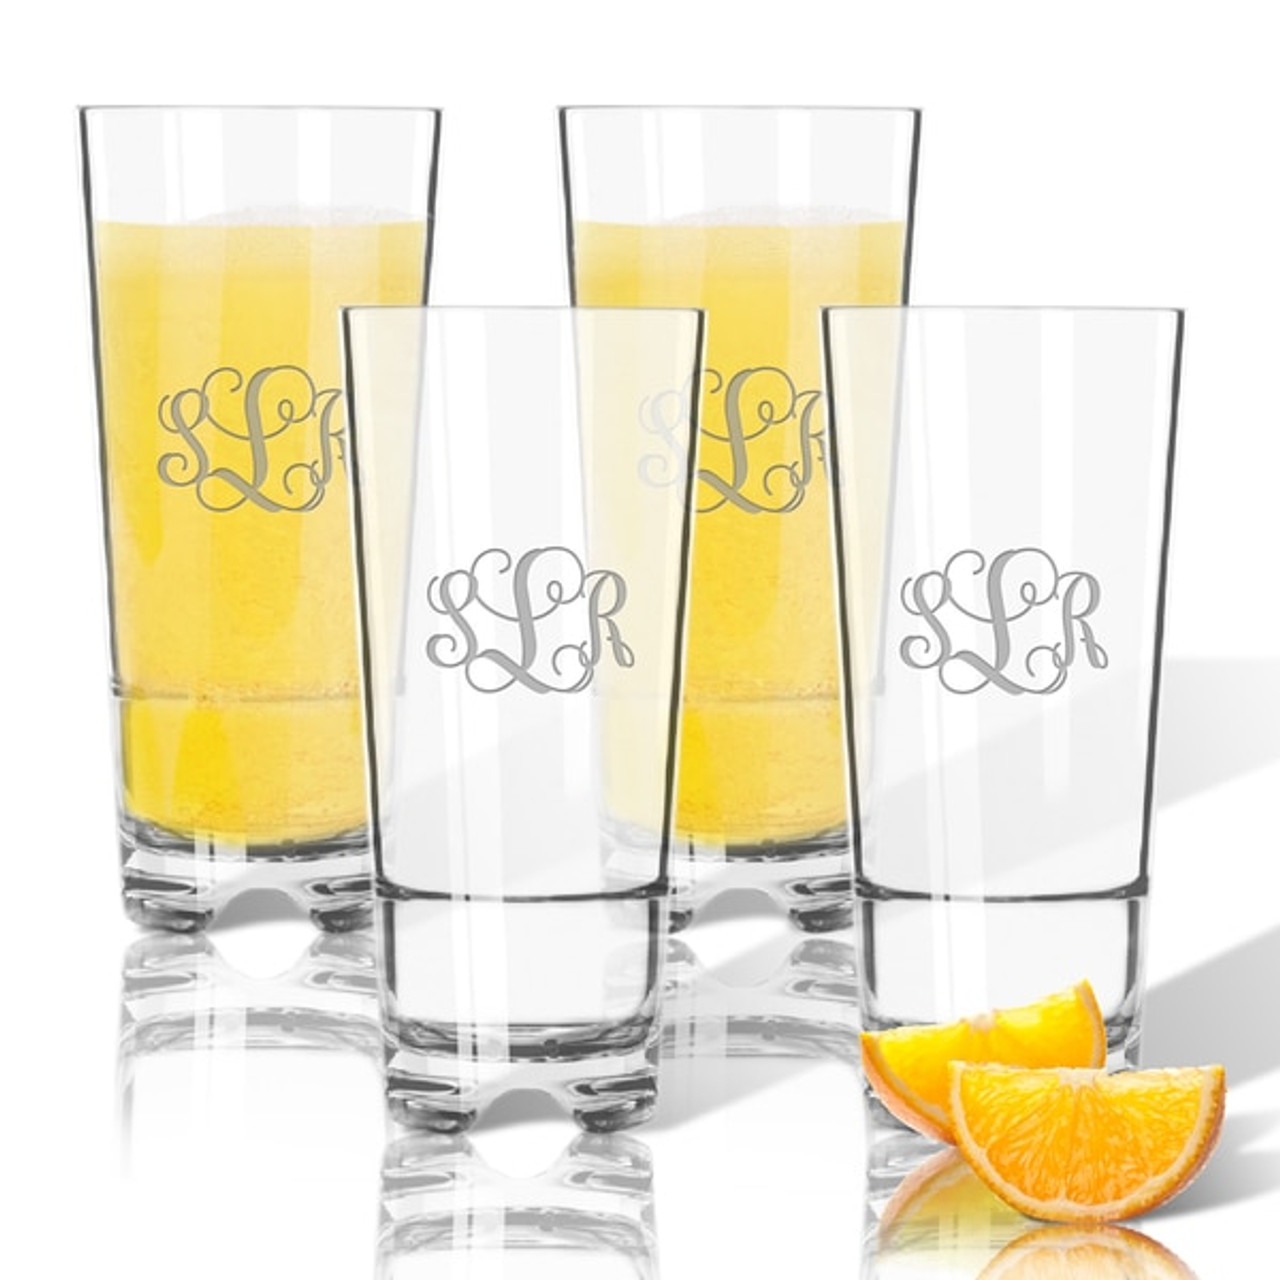 https://cdn11.bigcommerce.com/s-97fac/images/stencil/1280x1280/products/129671/198209/personalized-tritan-high-ball-glasses-16-oz-set-of-4-11__88117.1576520668__89478.1610402099.jpg?c=2